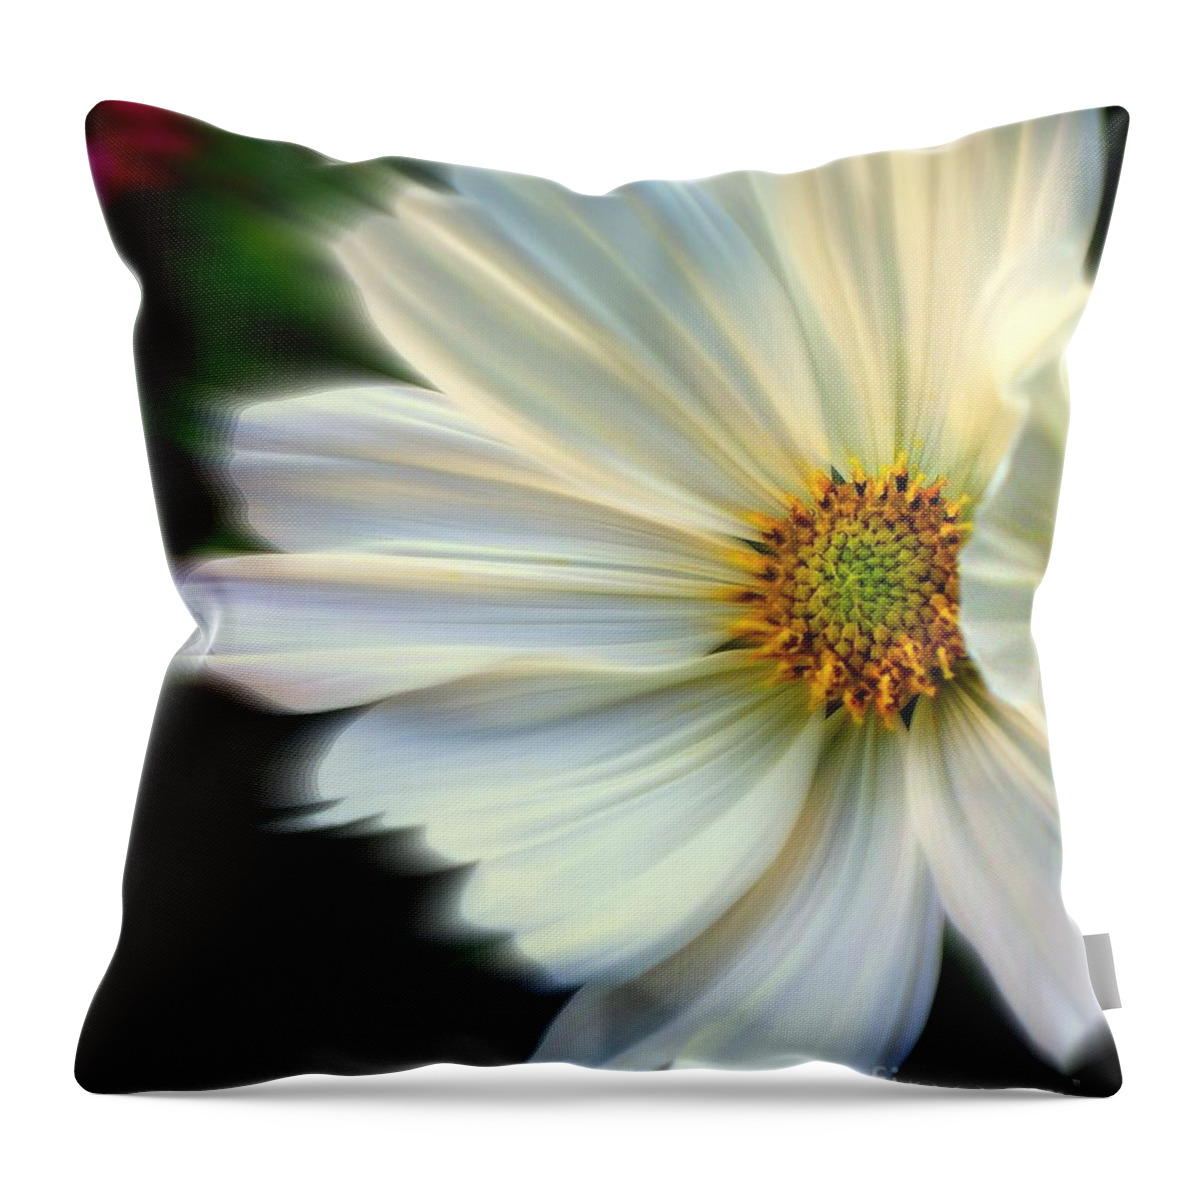 White Throw Pillow featuring the photograph Angelic by Elfriede Fulda